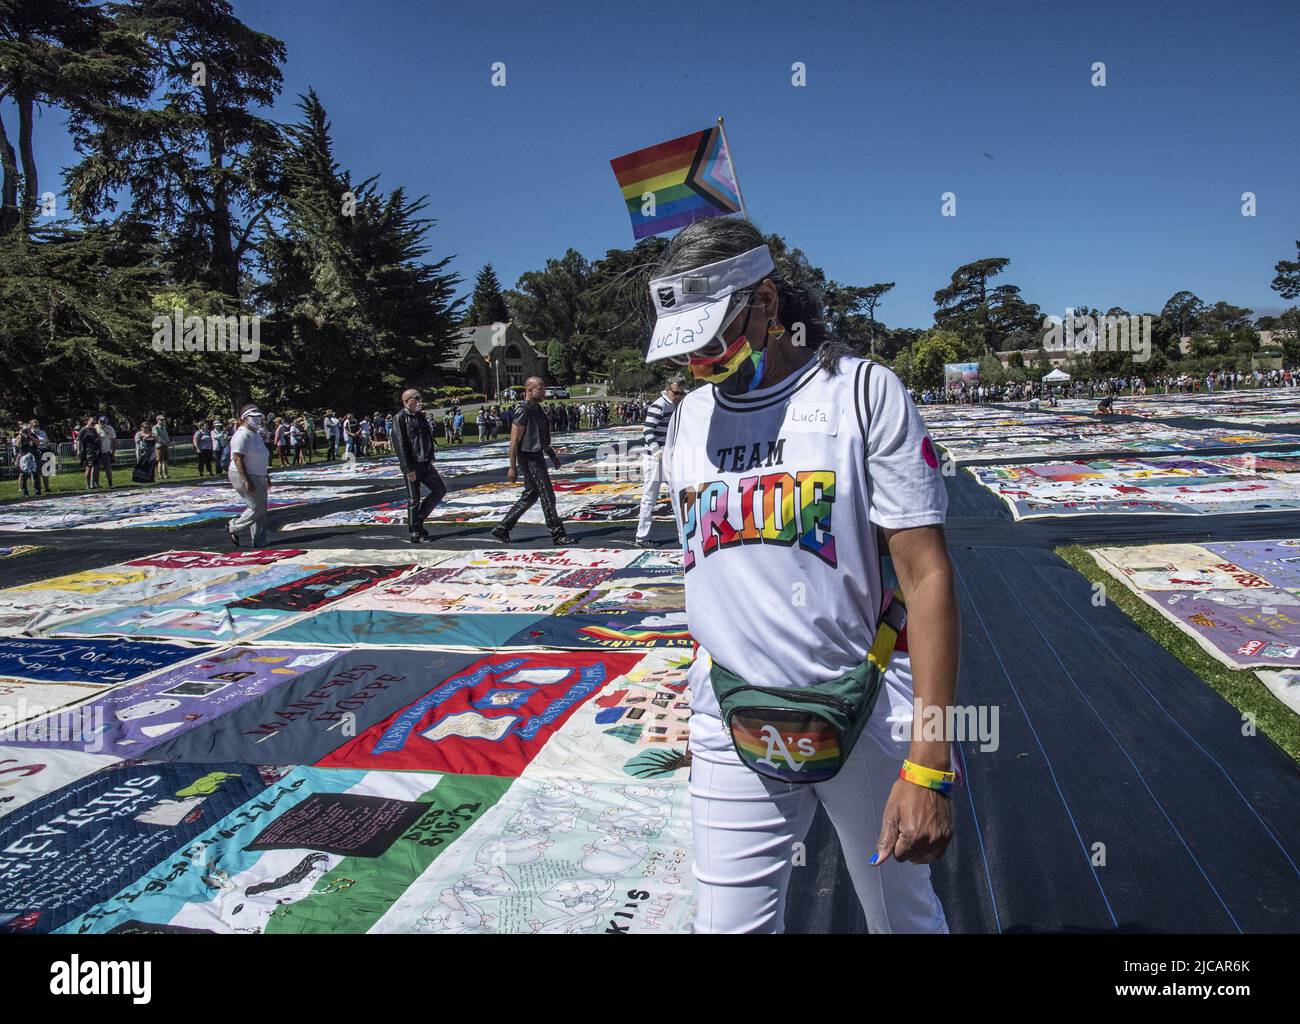 San Francisco, United States. 11th June, 2022. Volunteers help lay out the AIDS Memorial Quilt on its 35th anniversary in Robin Williams meadow in Golden Gate Park on Saturday, June 11, 2022 in San Francisco. 3,000 panels of the quilt were displayed, each dedicated to a person who died of AIDS. Photo by Terry Schmitt/UPI Credit: UPI/Alamy Live News Stock Photo